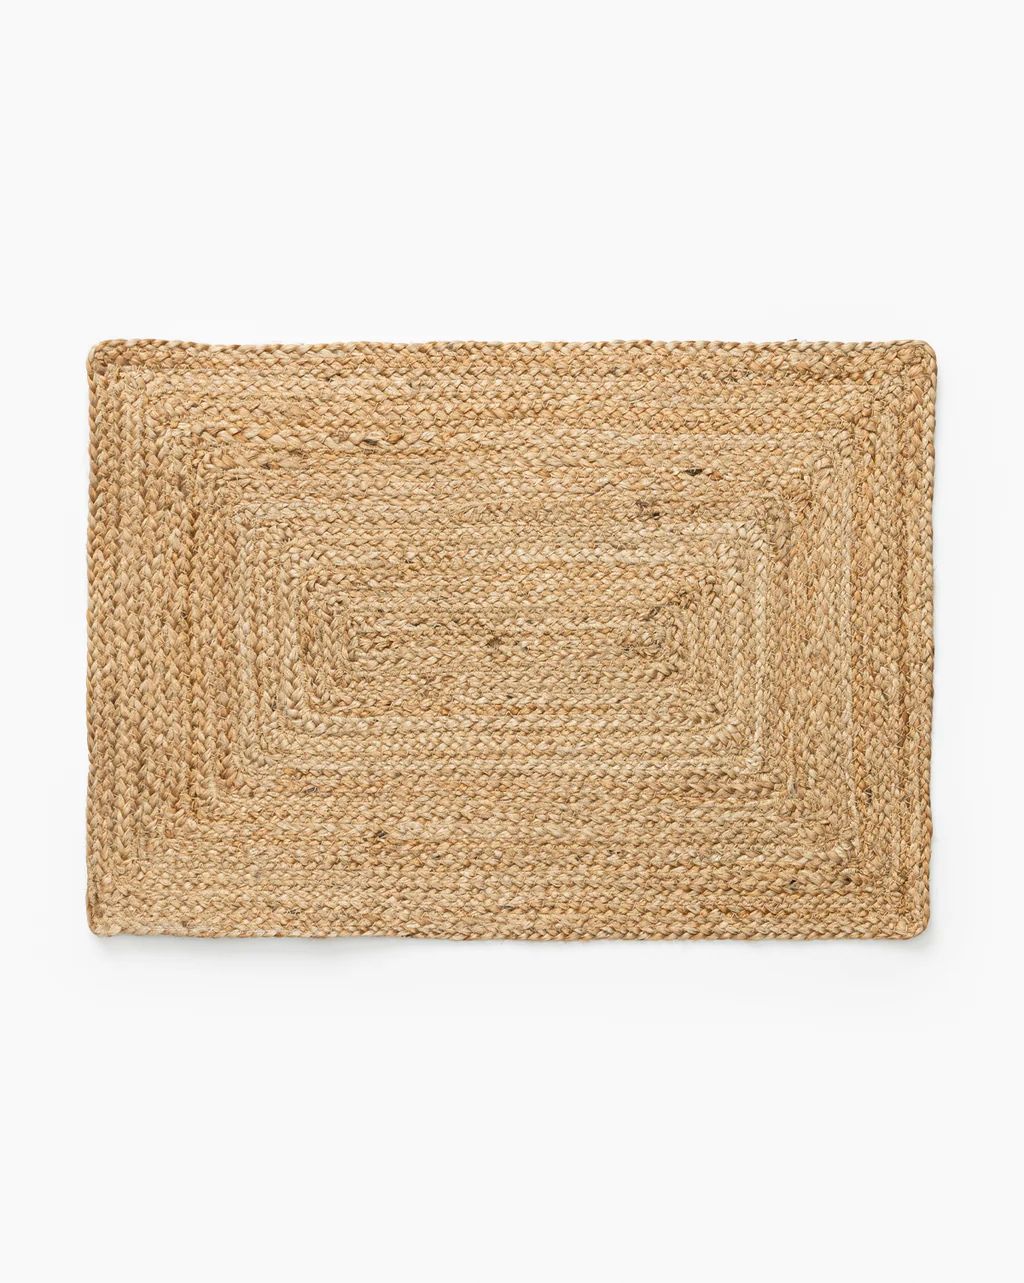 Ewing Jute Woven Placemat | McGee & Co.